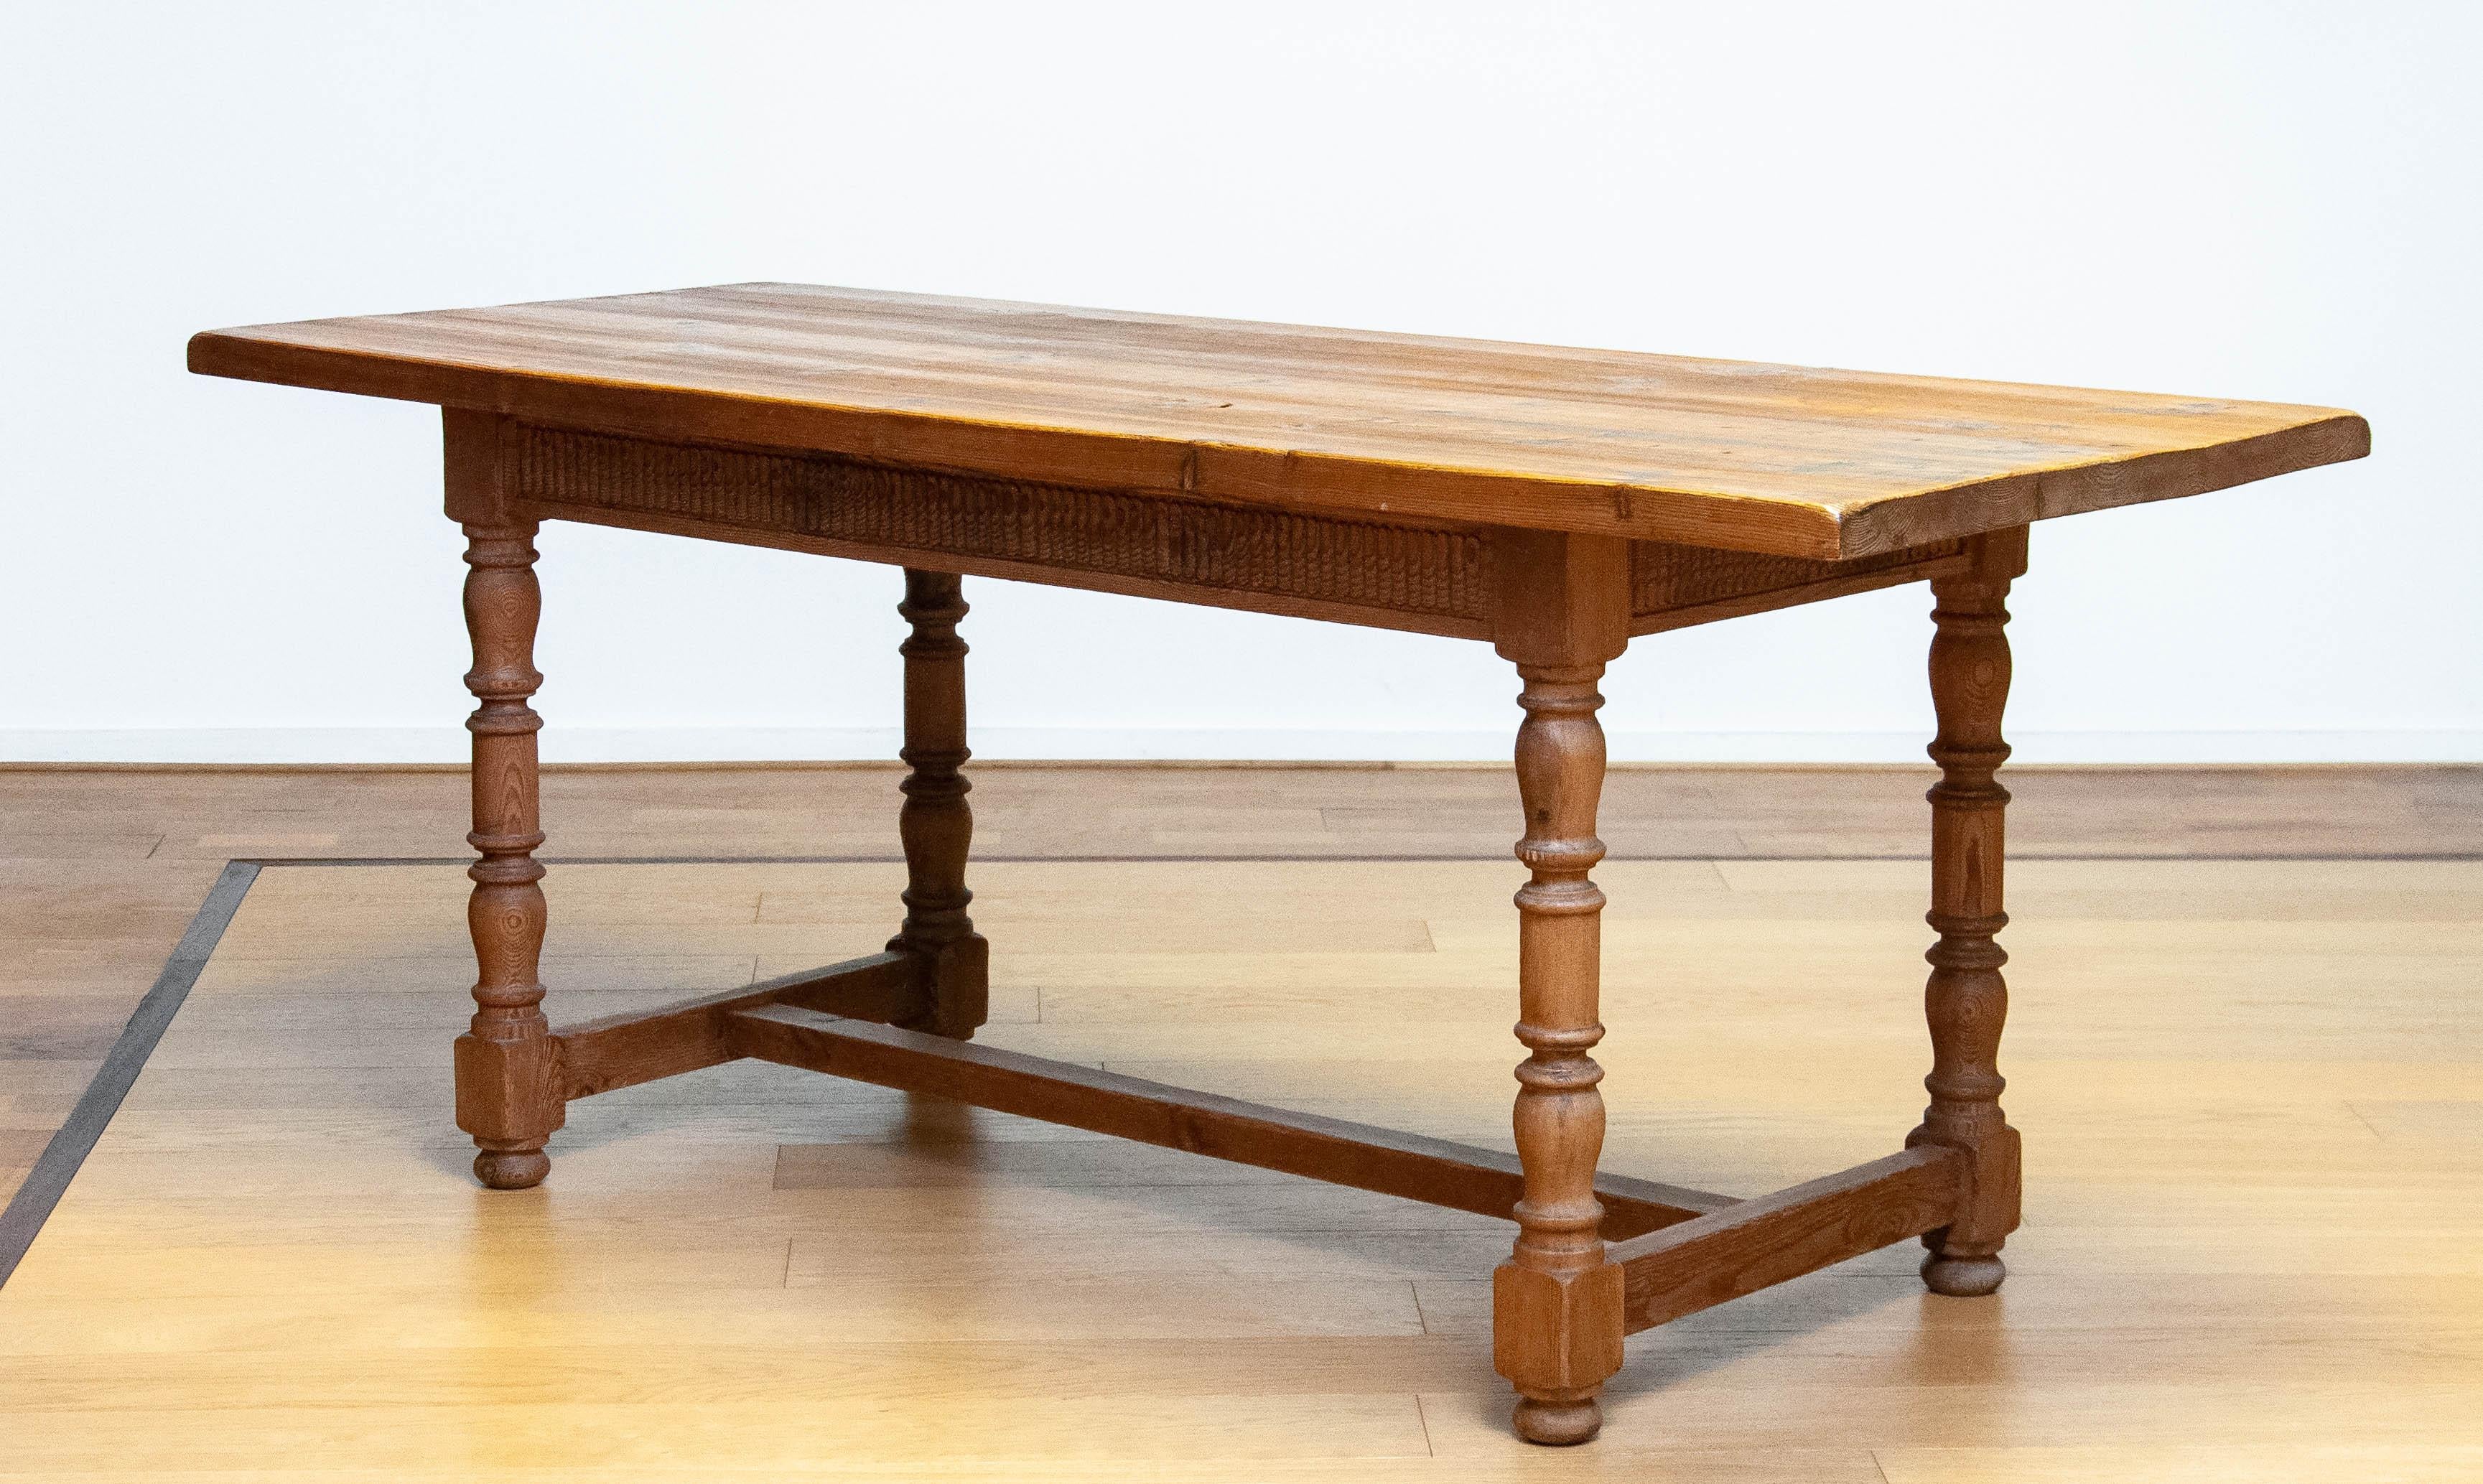 Absolutely beautiful late 19th century Swedish 'Folk Art' country farm dining table in pine. Because of the dry-out pine grain, true al these years, this table has a fantastic 'lived true' character what makes it a real eye catcher into you interior